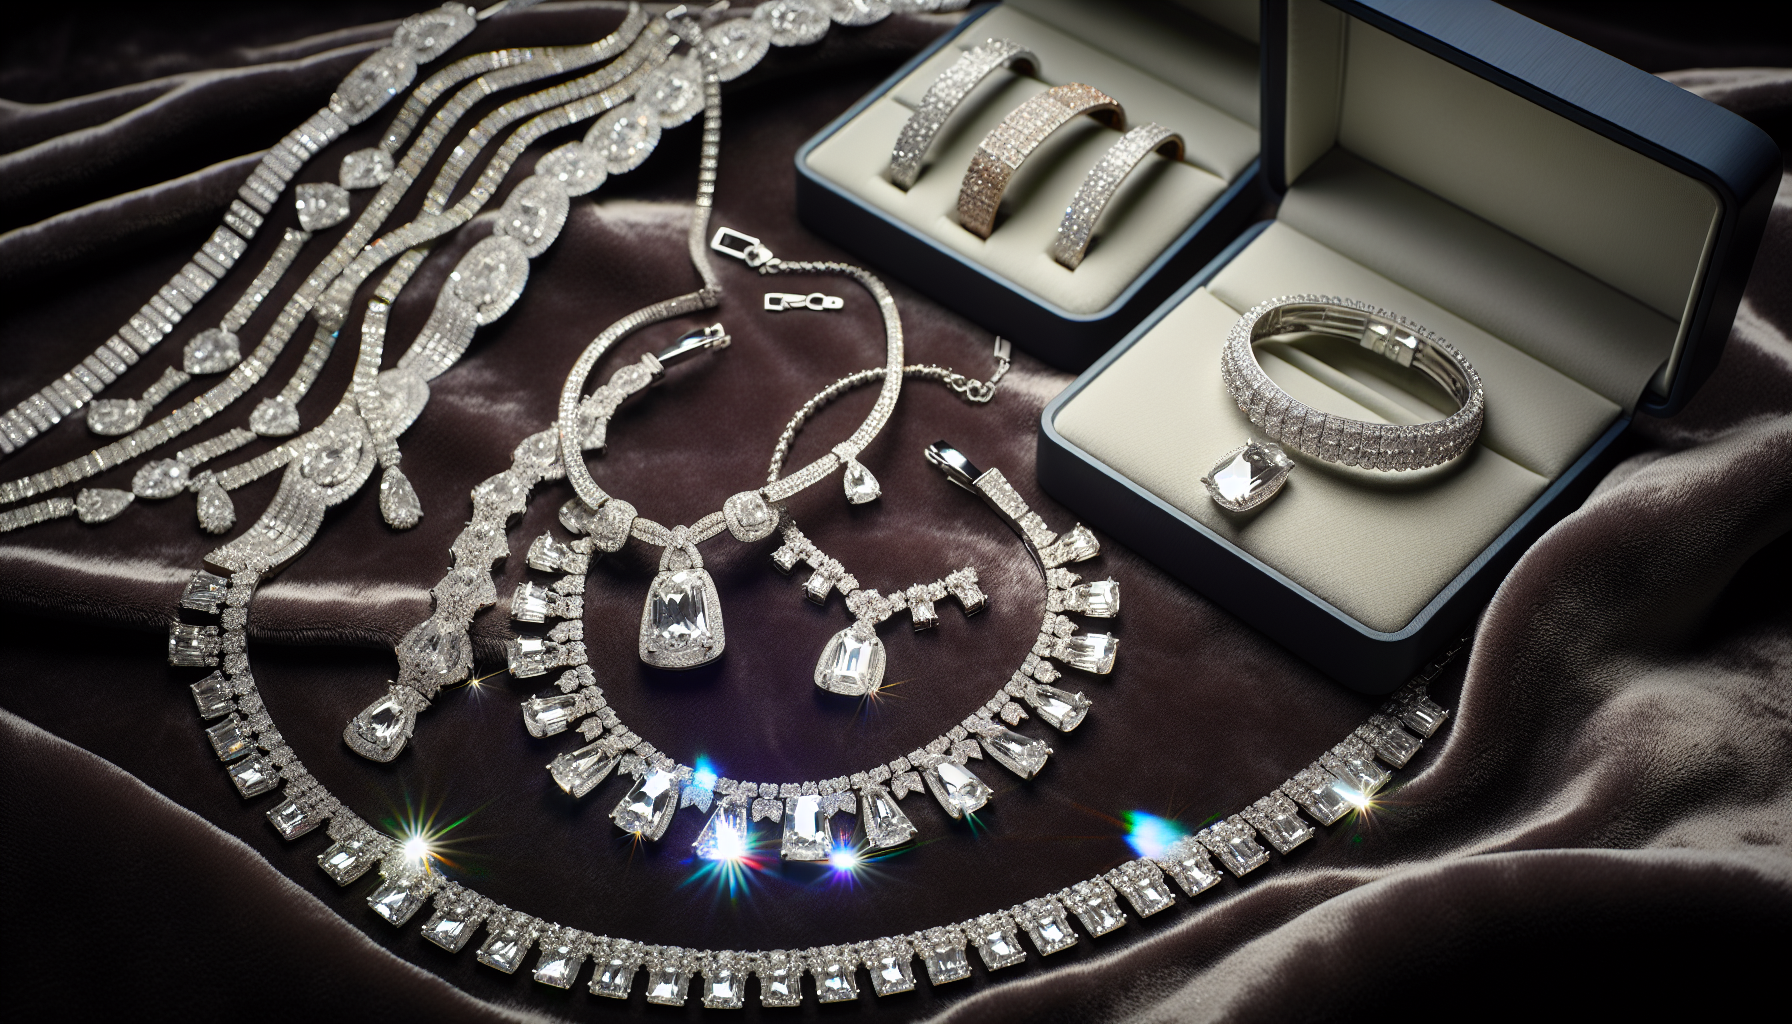 Sparkling diamond necklaces and bracelets for gifting